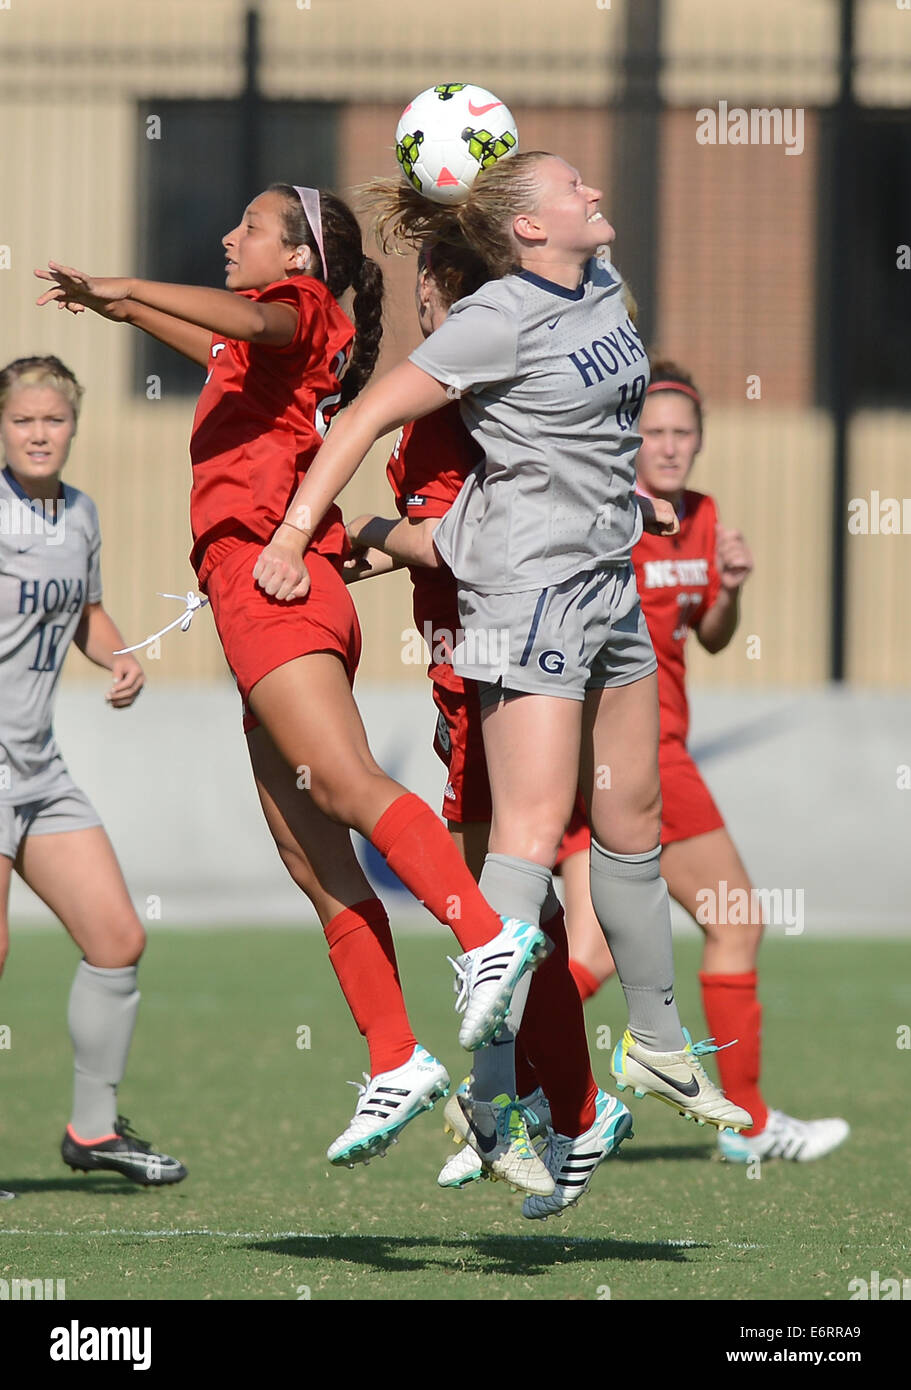 Washington, District of Columbia, USA. 29th Aug, 2014. Georgetown forward ASHLEY SHAFFER (19) battles for a head ball with North Carolina State forward CAROLINE GENTRY (25), left, and North Carolina State defender CAILYN BOCH (22), back, in the second half at Shaw Field in Washington. Georgetown defeated N.C. State, 6-0. © Chuck Myers/ZUMA Wire/Alamy Live News Stock Photo